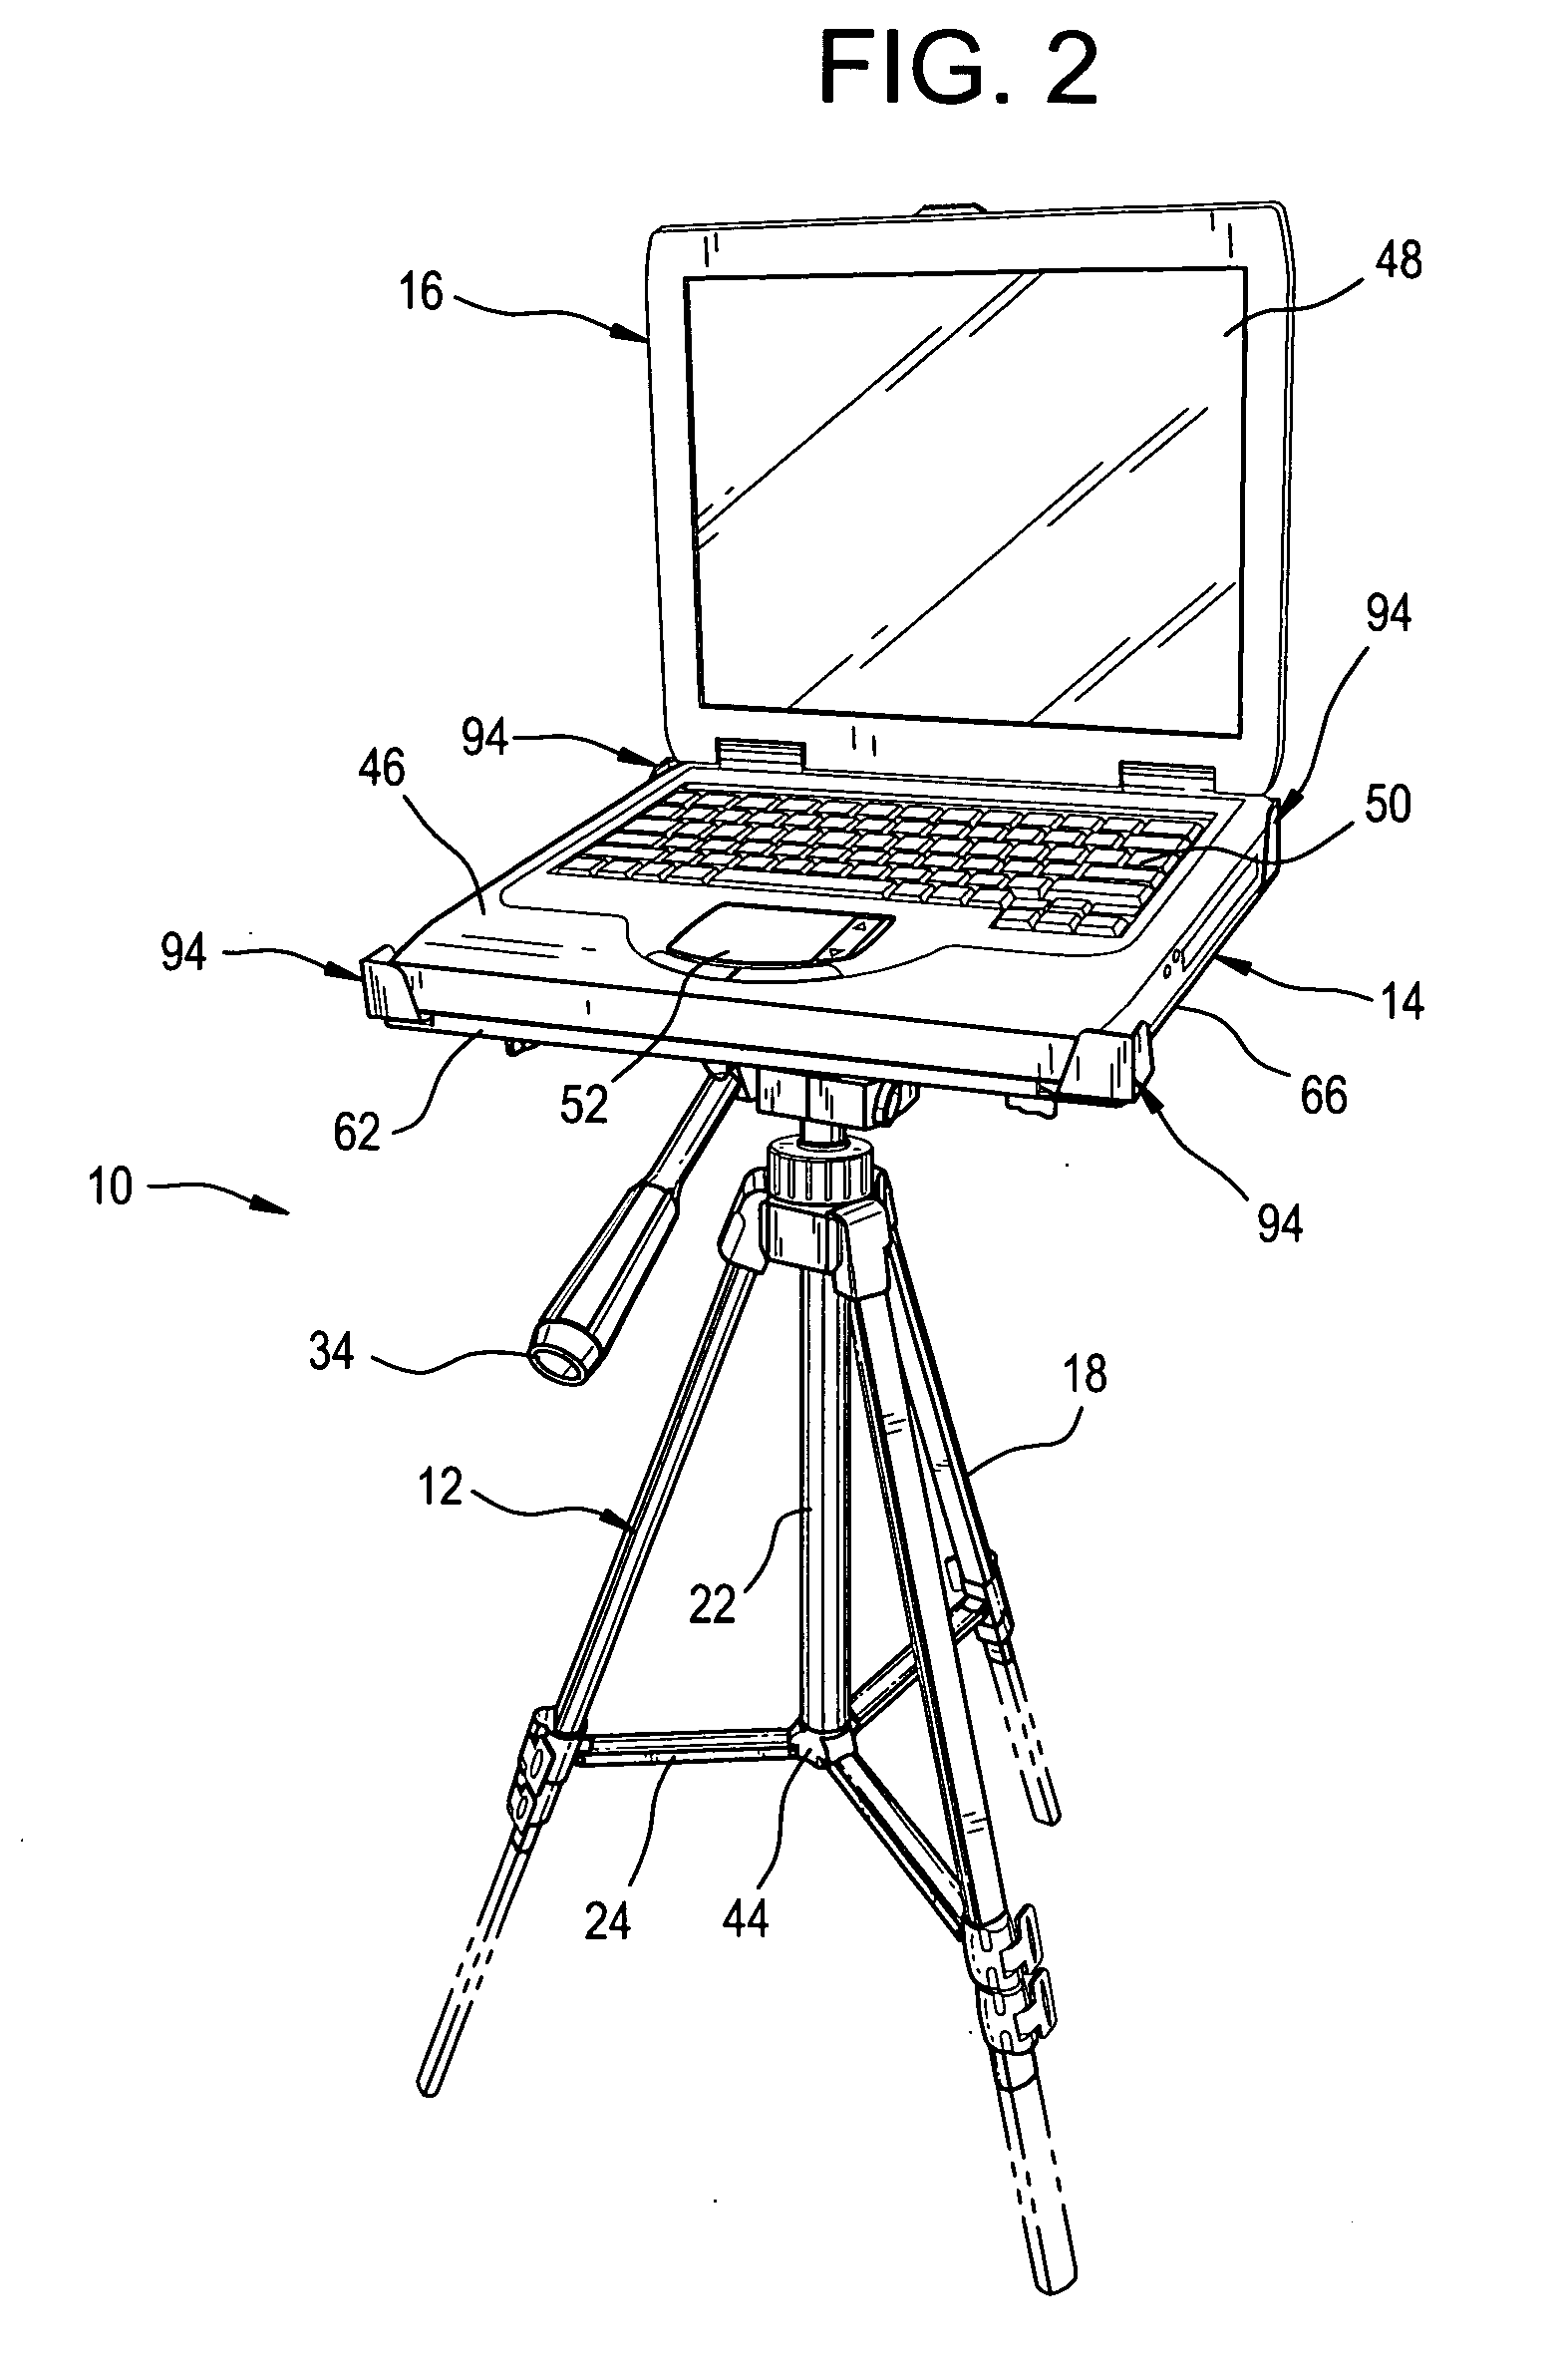 Laptop computer stand